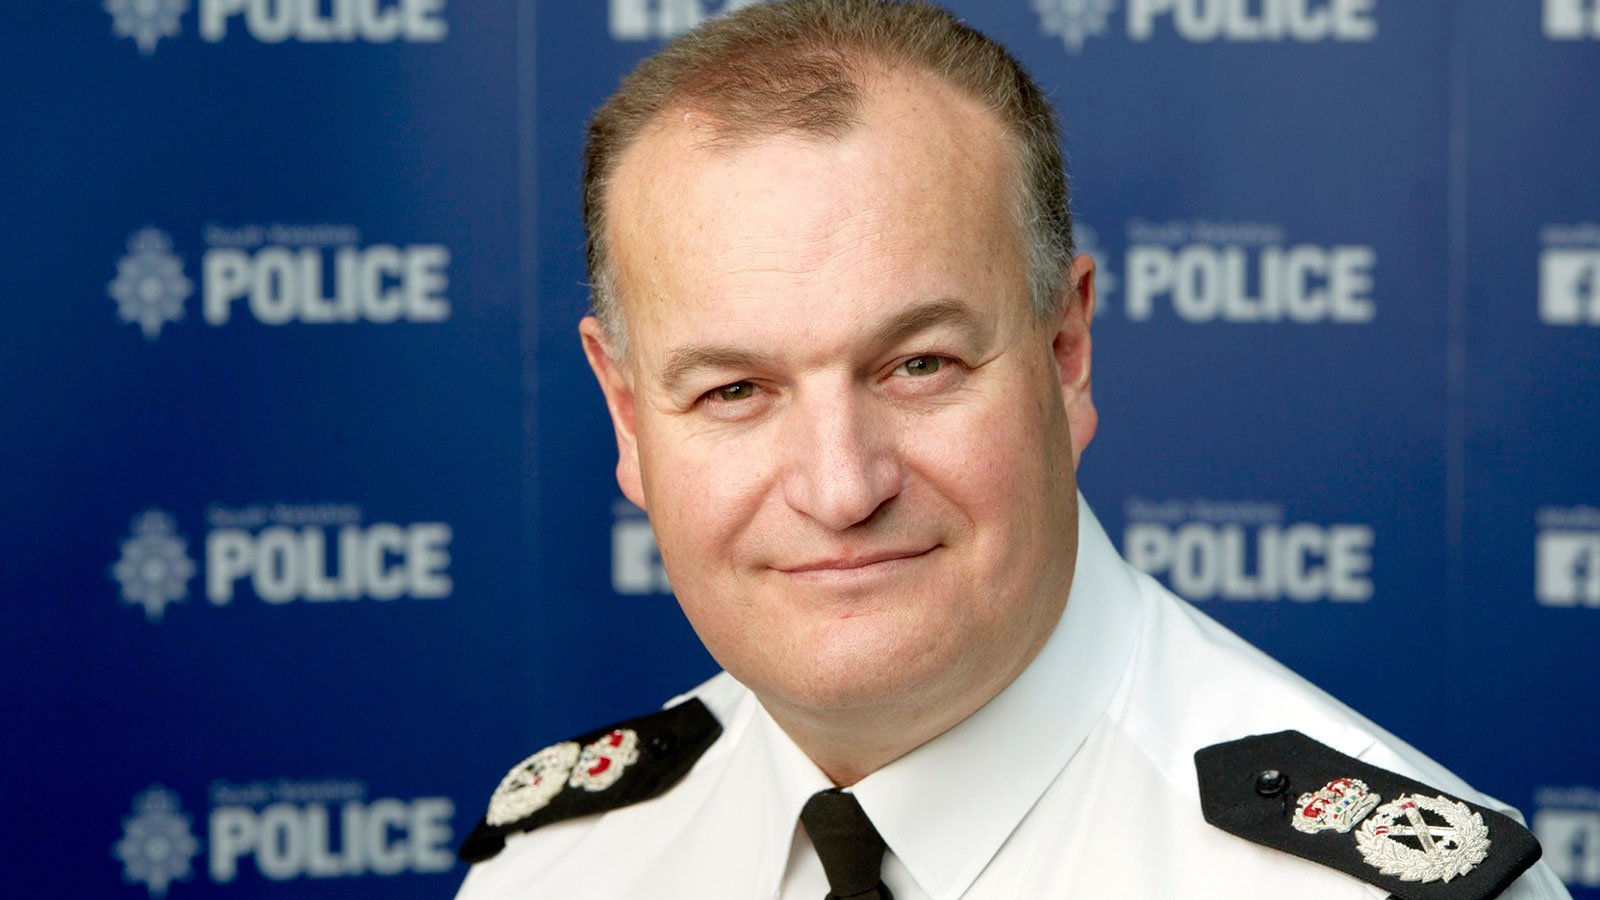 Stephen Watson QPM, South Yorkshire Police Chief Constable